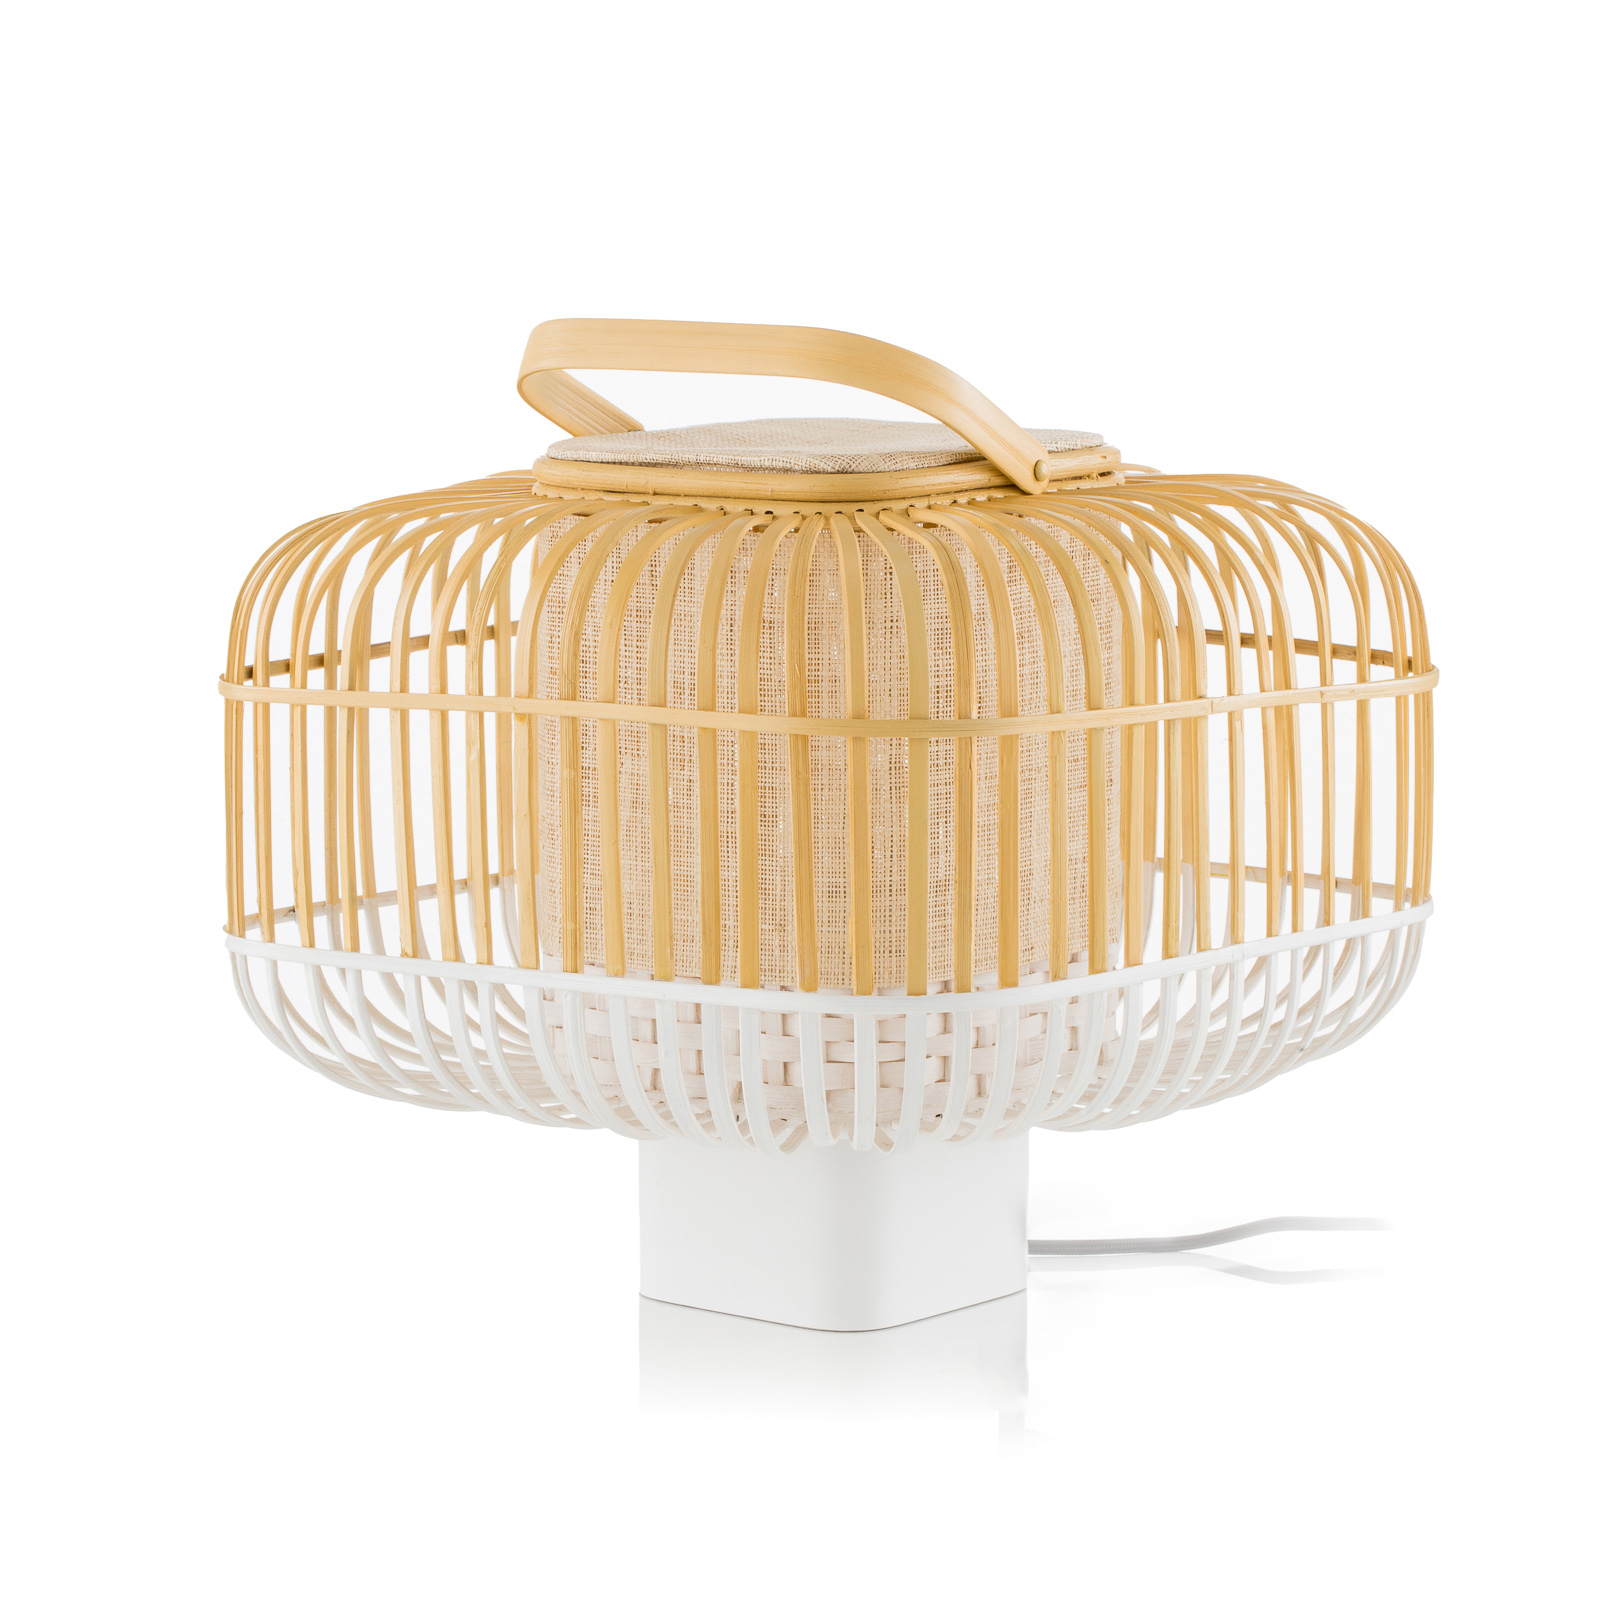 Forestier Bamboo Square S table lamp in white